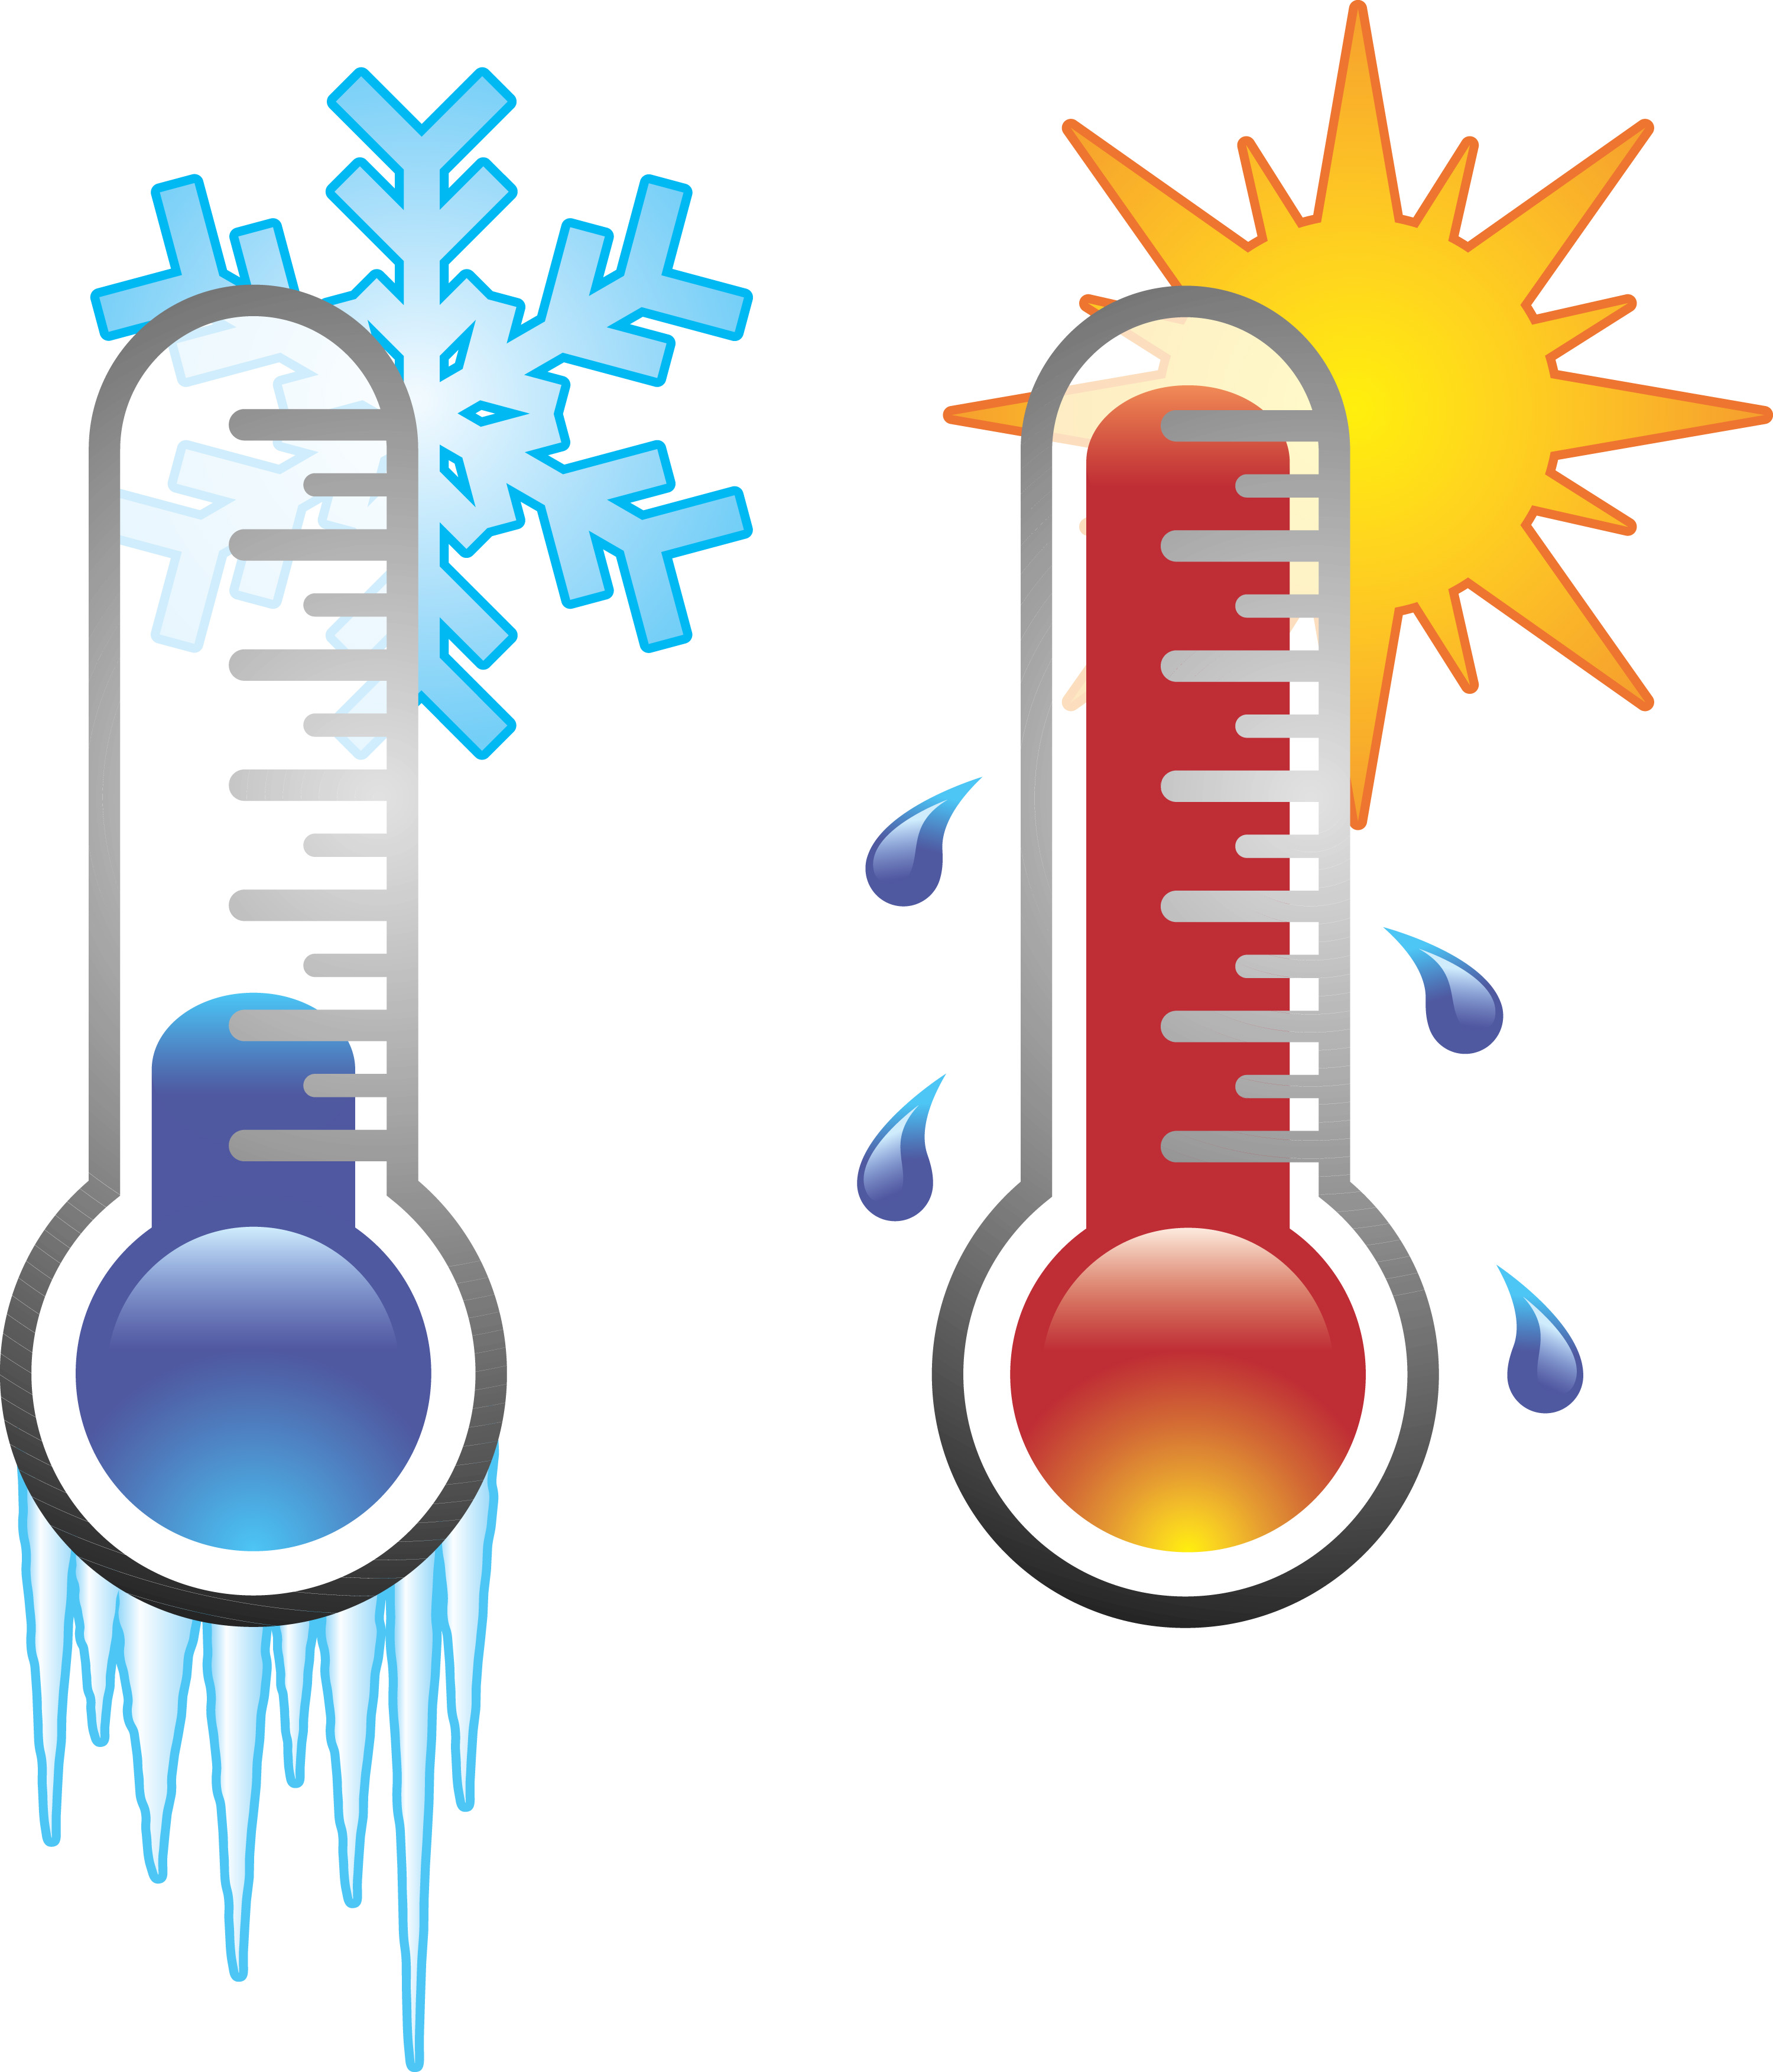 Thermometer Clipart Blue and other clipart images on Cliparts pub ™.